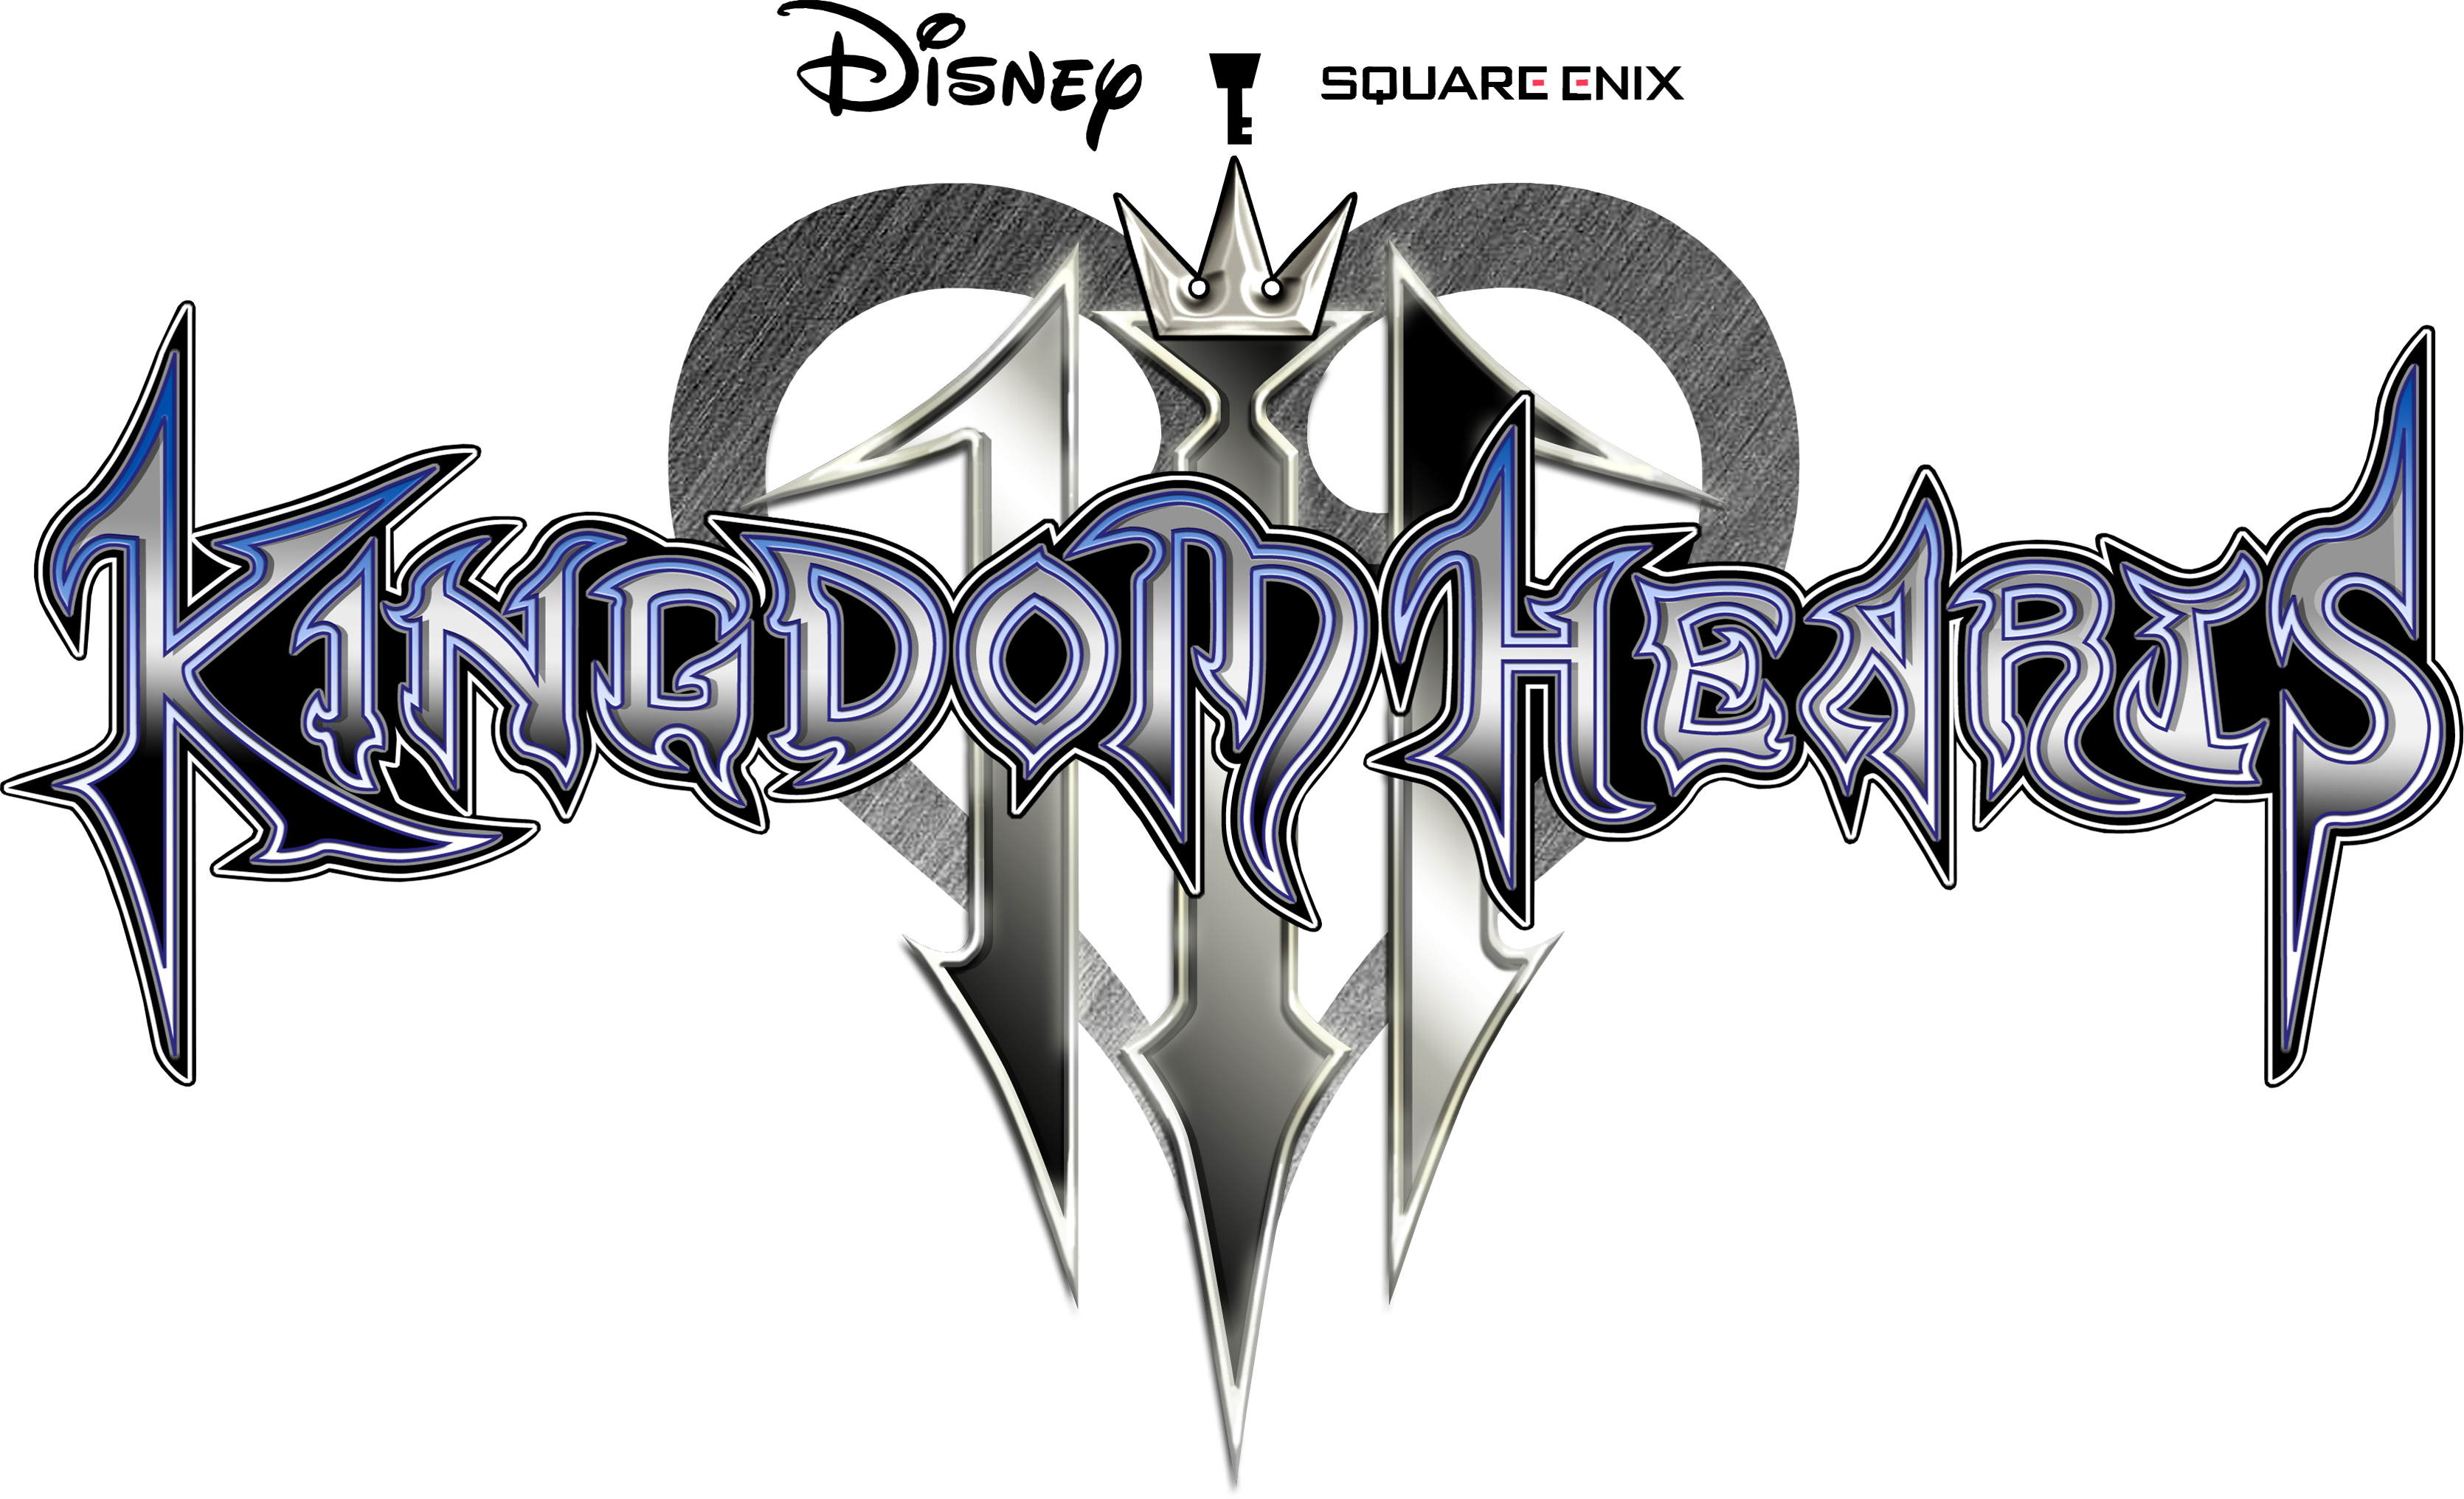 Kingdom Hearts III Backgrounds, Compatible - PC, Mobile, Gadgets| 3340x2032 px